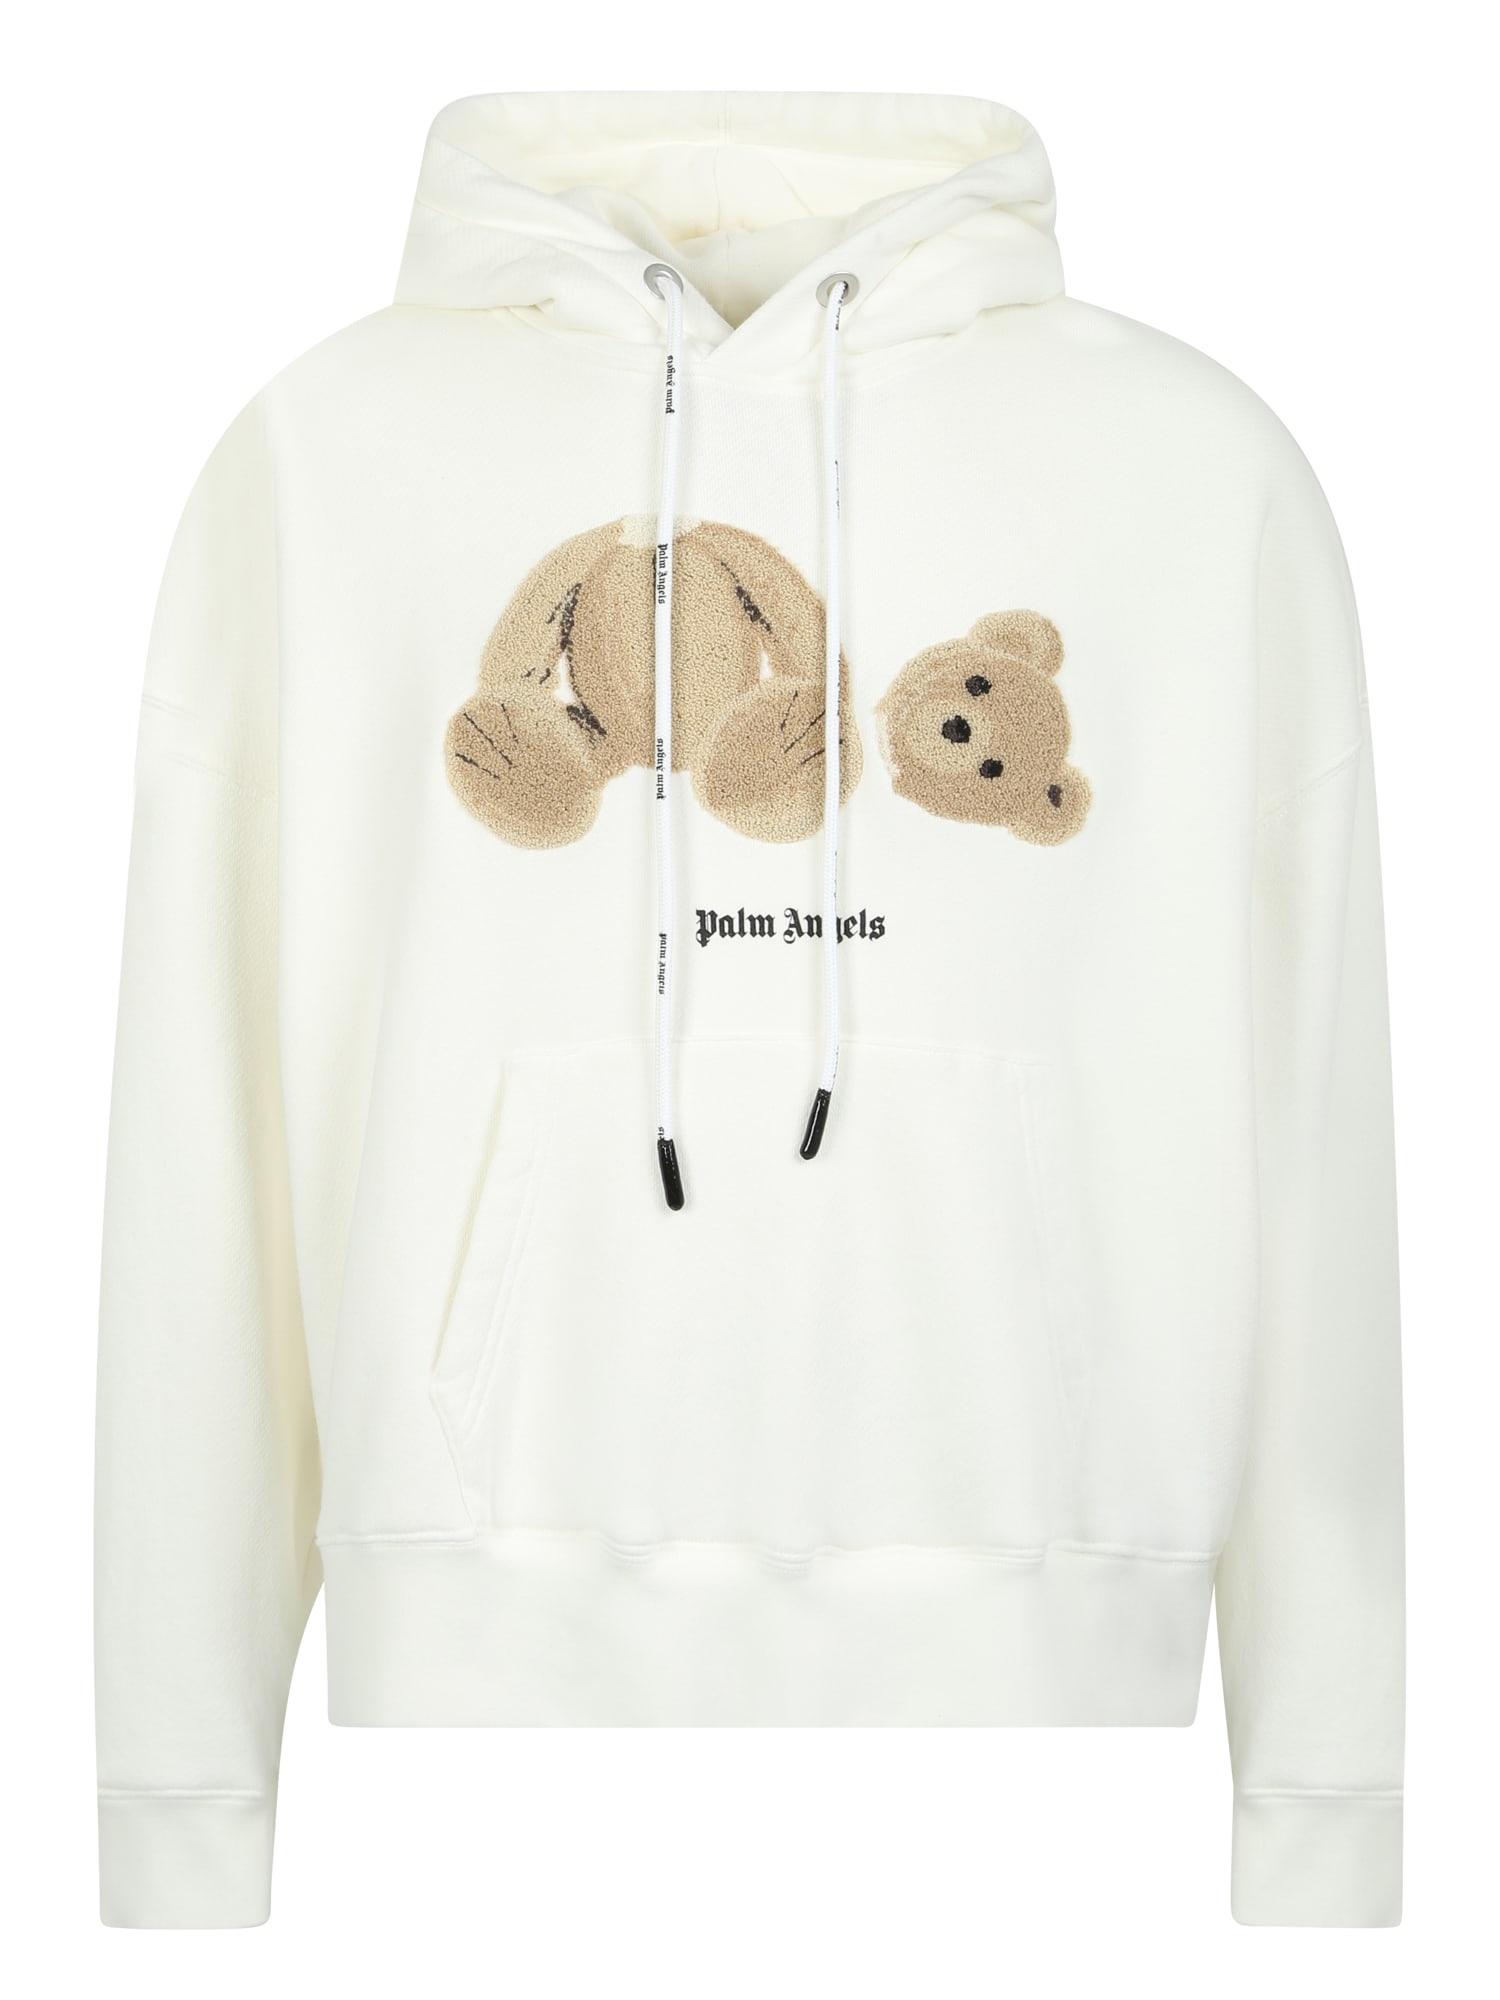 Palm Angels Sweatshirt With Characteristic Bear Print Featuring A Comfortable Fit That Embraces The Casual